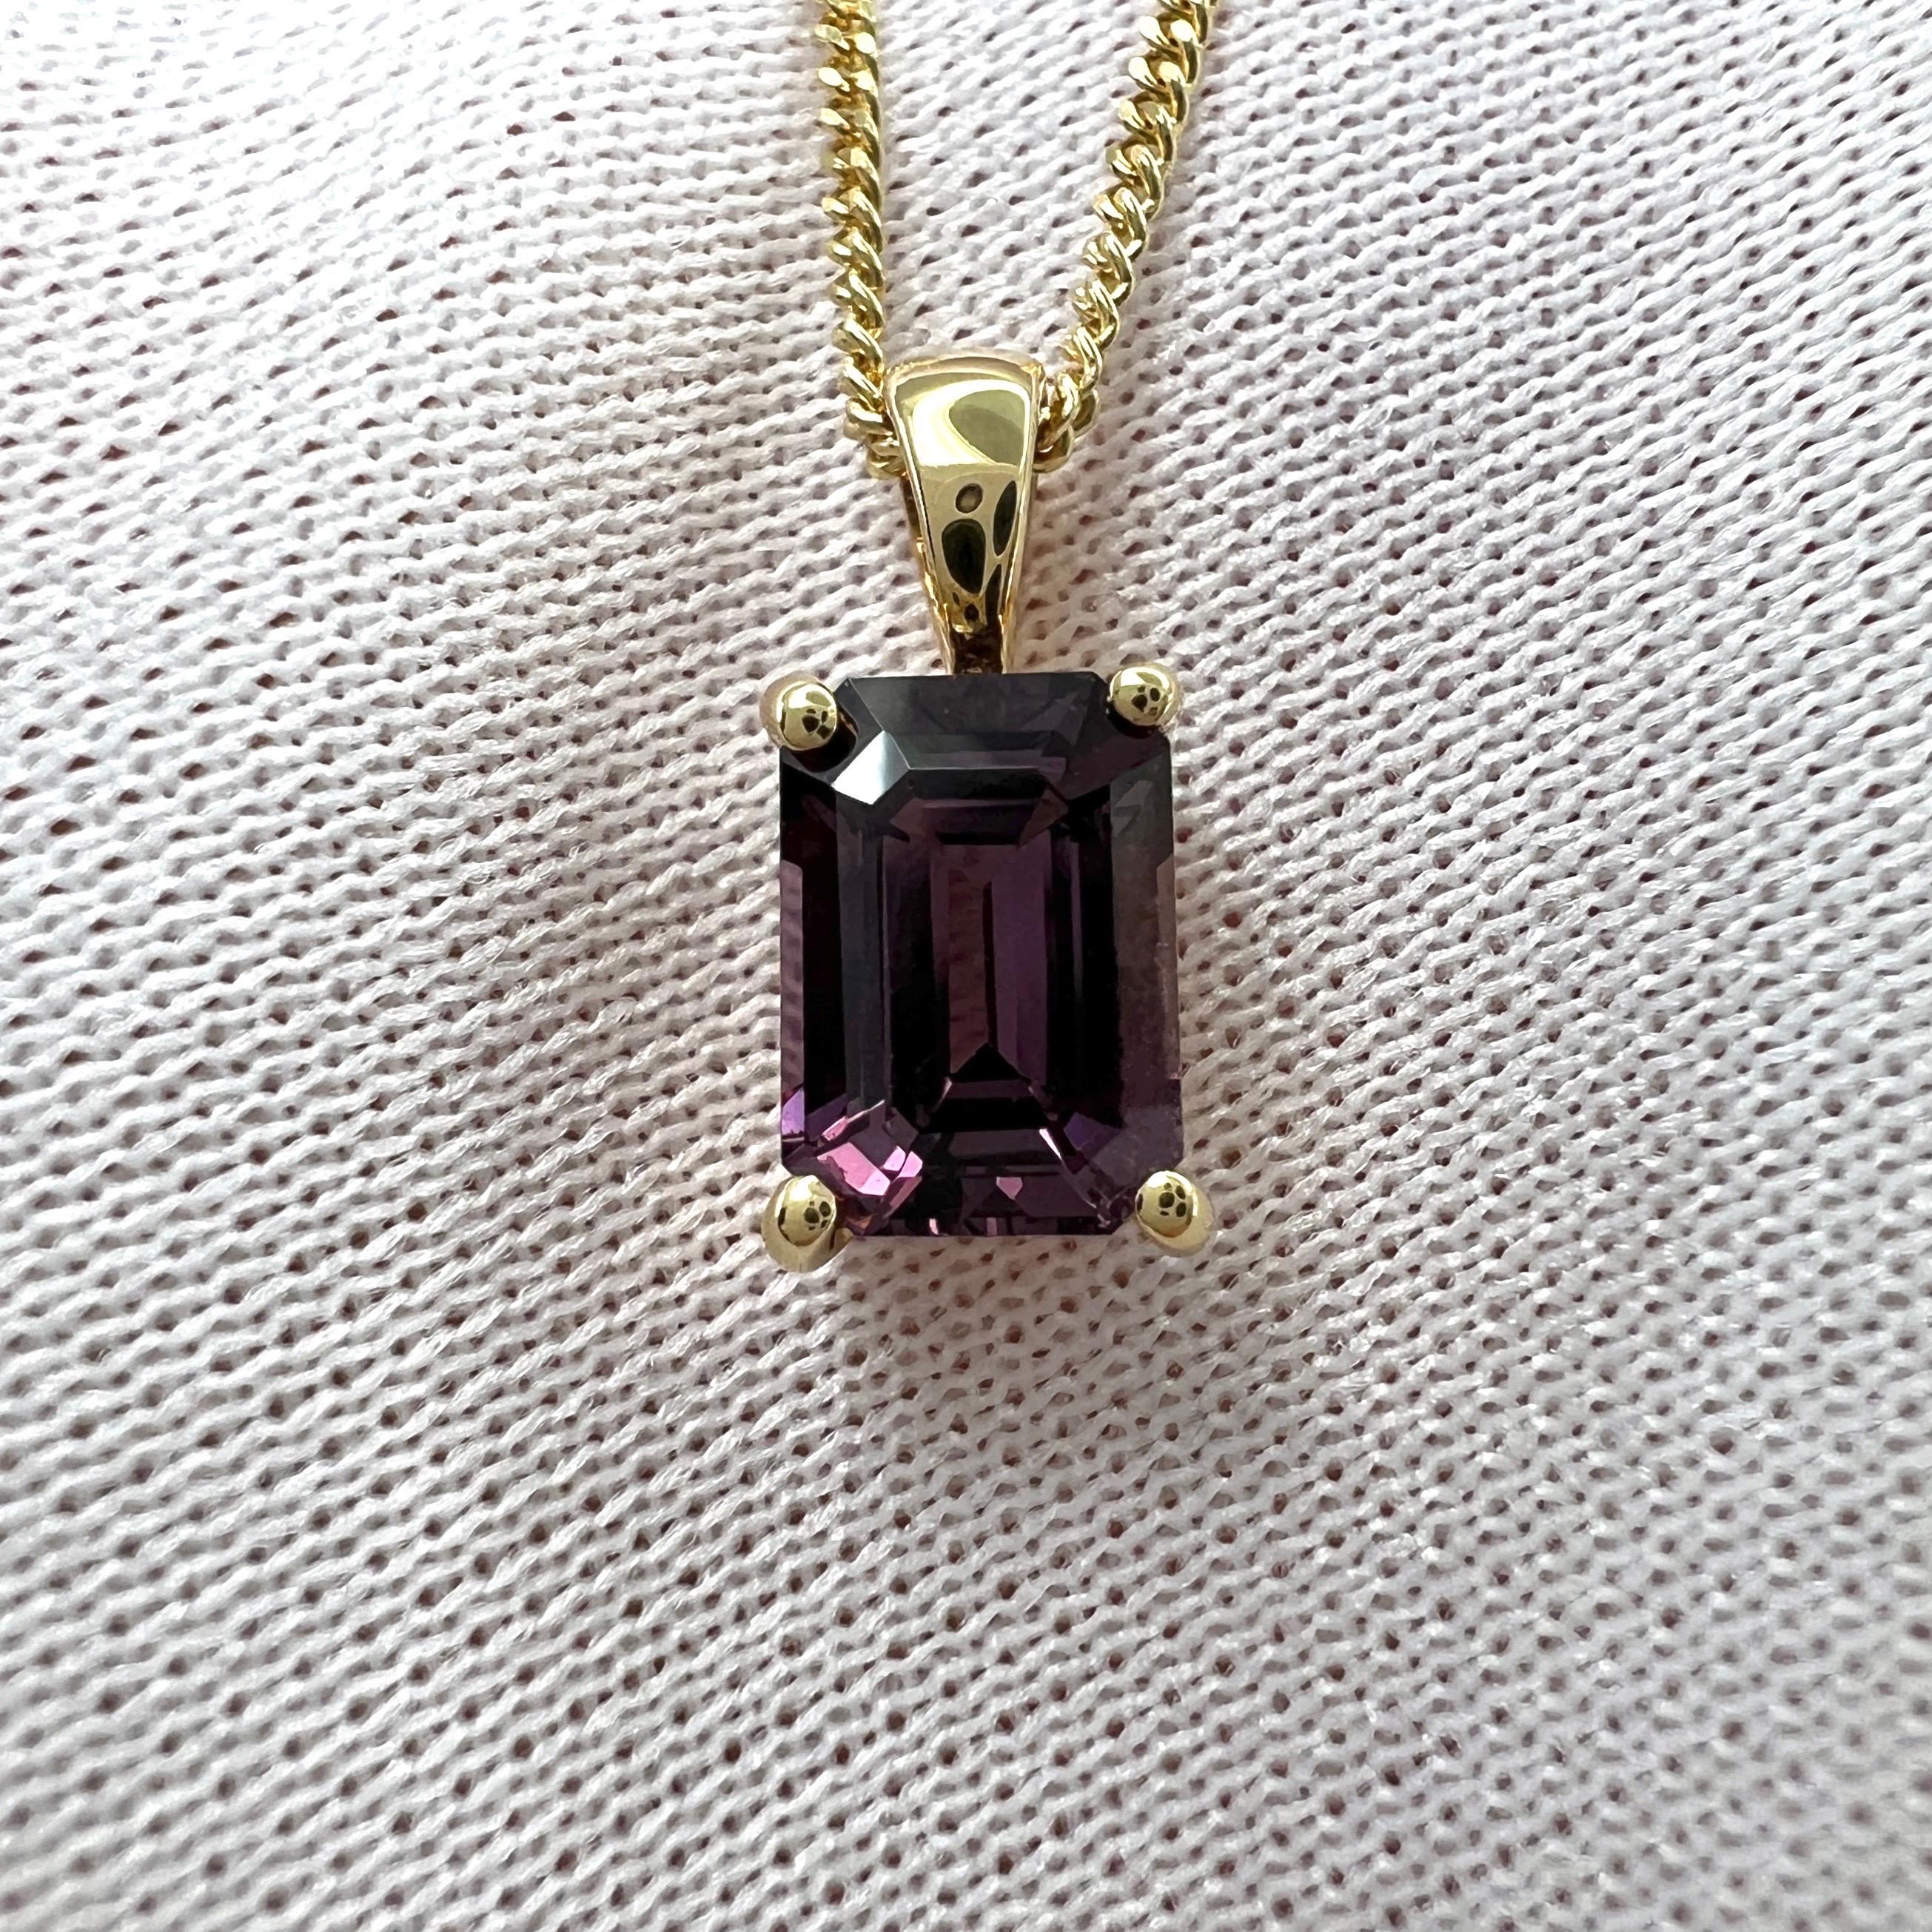 Vivid Pink Purple Spinel Emerald Cut Yellow Gold Pendant.

Beautiful 1.17ct vivid pink purple spinel set in a fine 18k yellow gold solitaire pendant.

Stunning spinel with a beautiful colour and very good clarity. Very clean stone with only some